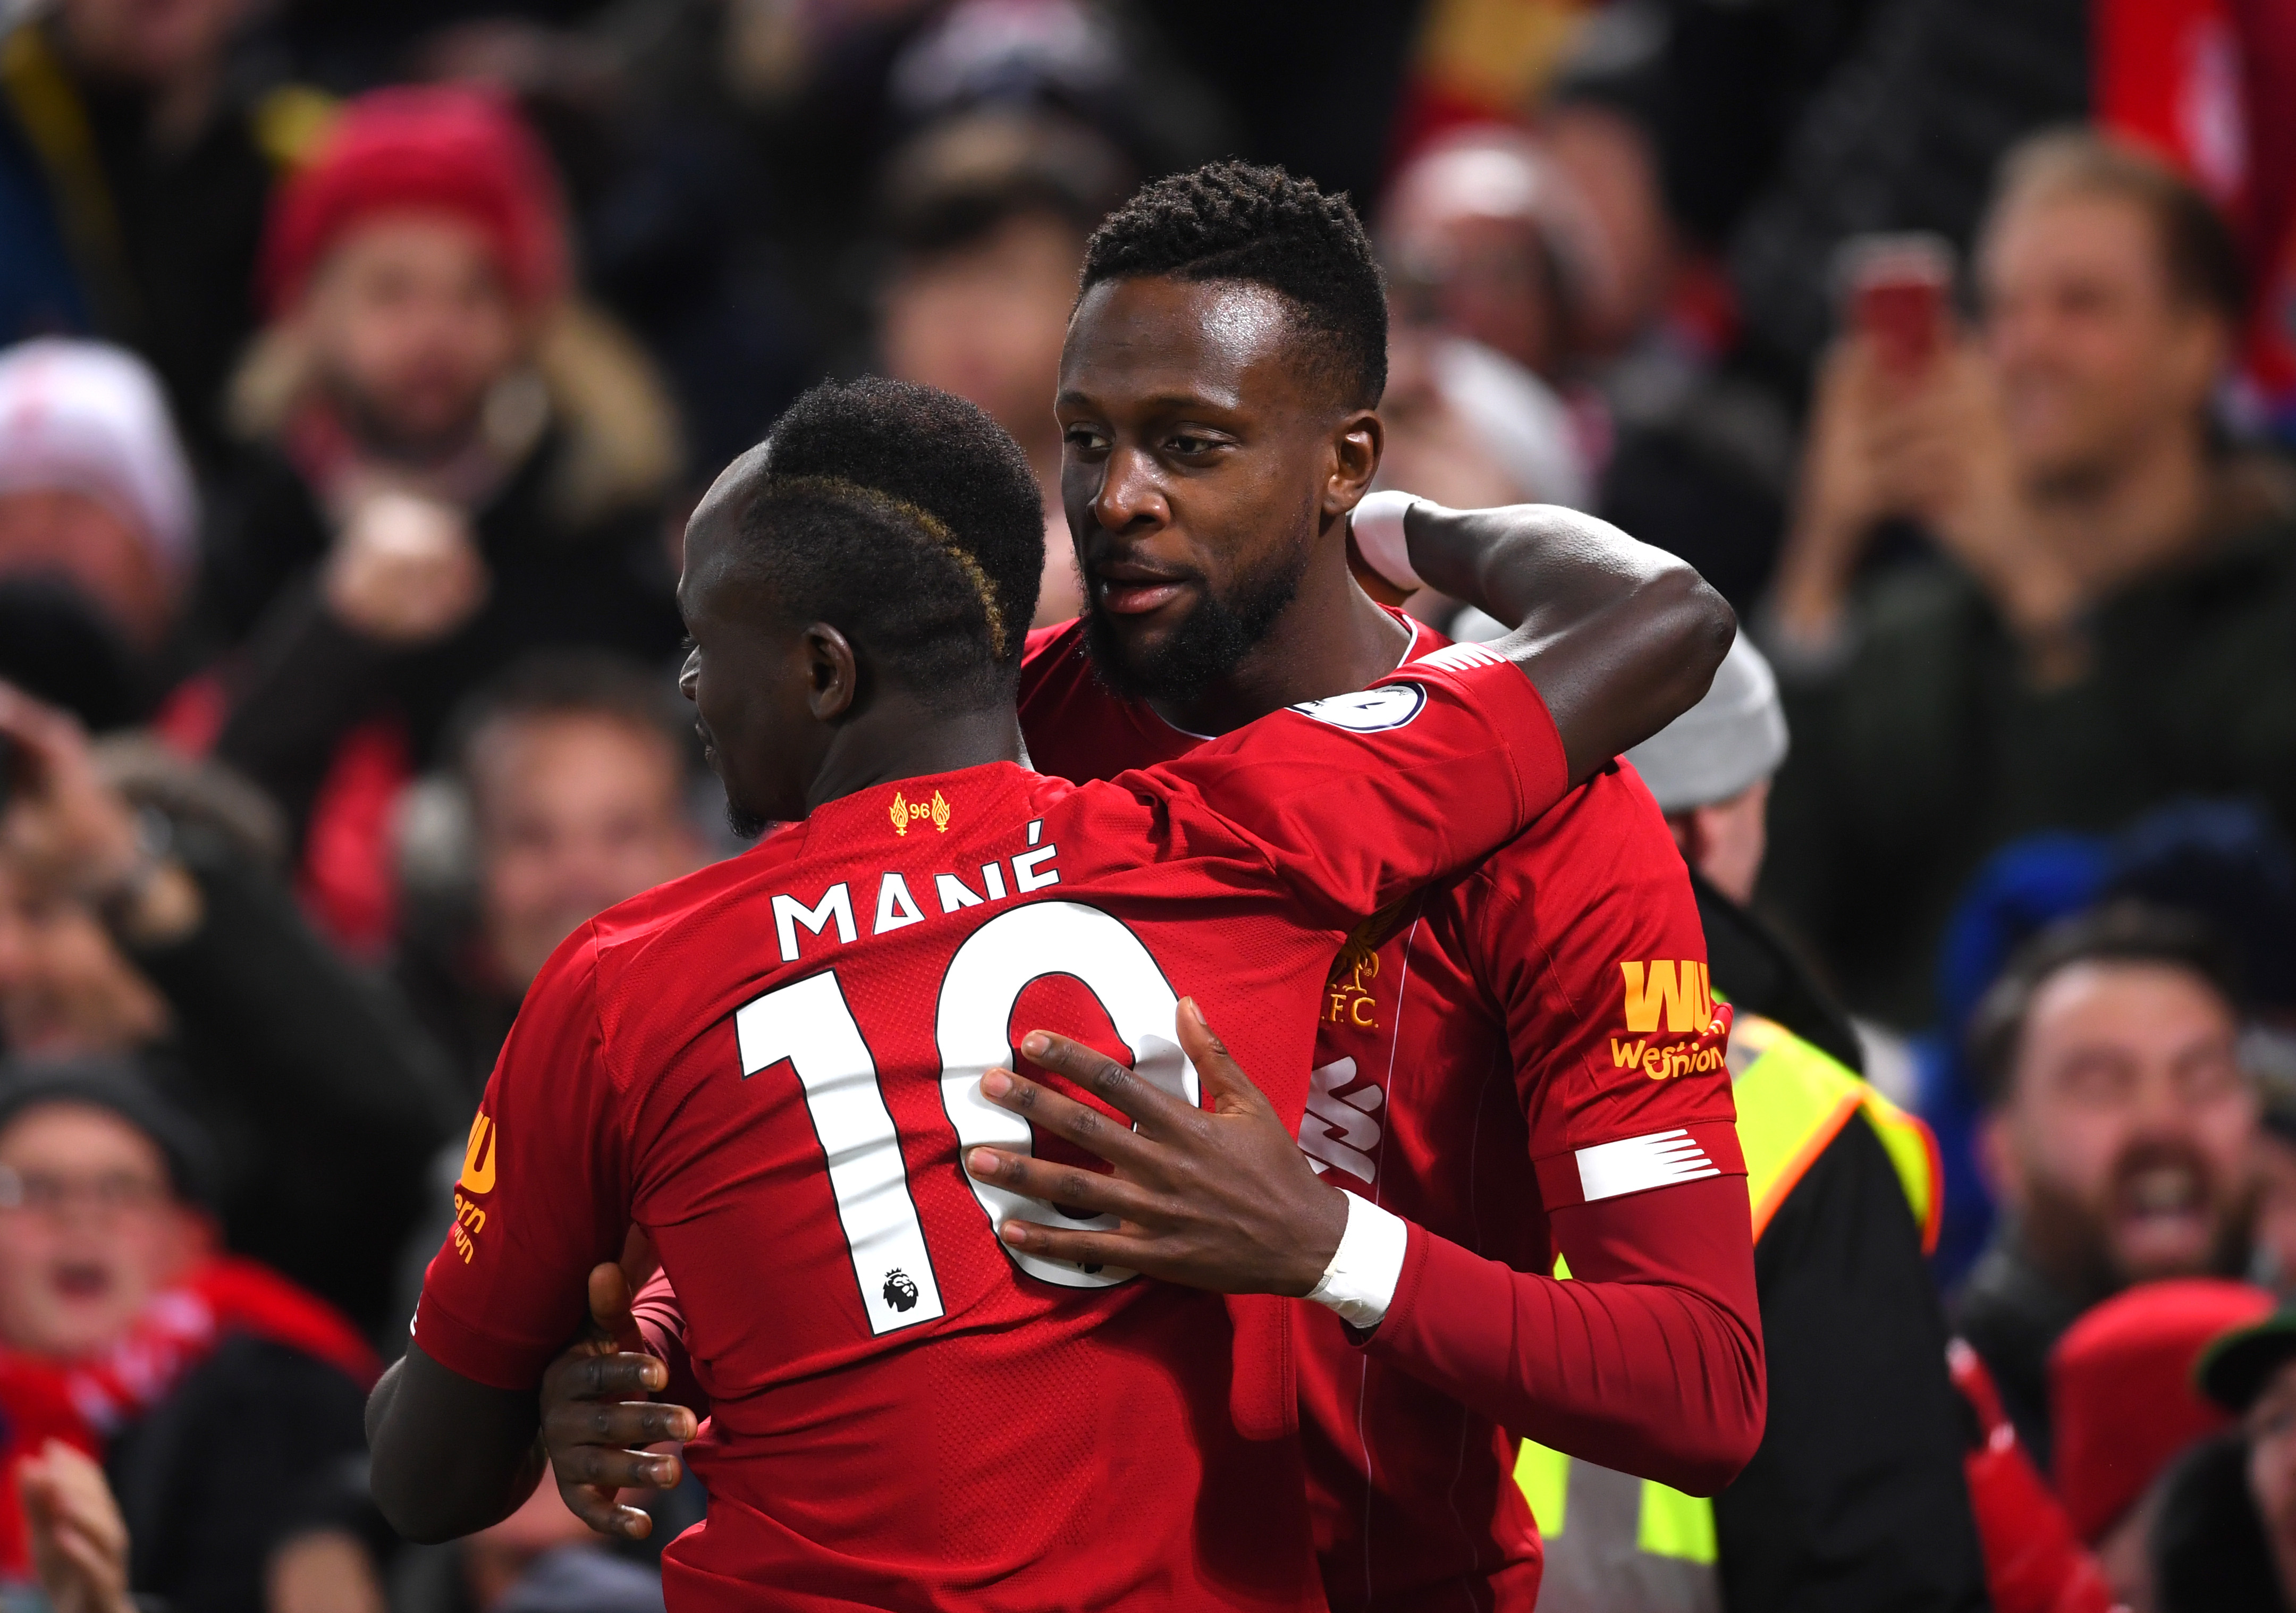 LIVERPOOL, ENGLAND - DECEMBER 04: Divock Origi of Liverpool celebrates with teammate Sadio Mane after scoring his team's first goal during the Premier League match between Liverpool FC and Everton FC at Anfield on December 04, 2019 in Liverpool, United Kingdom. (Photo by Laurence Griffiths/Getty Images)